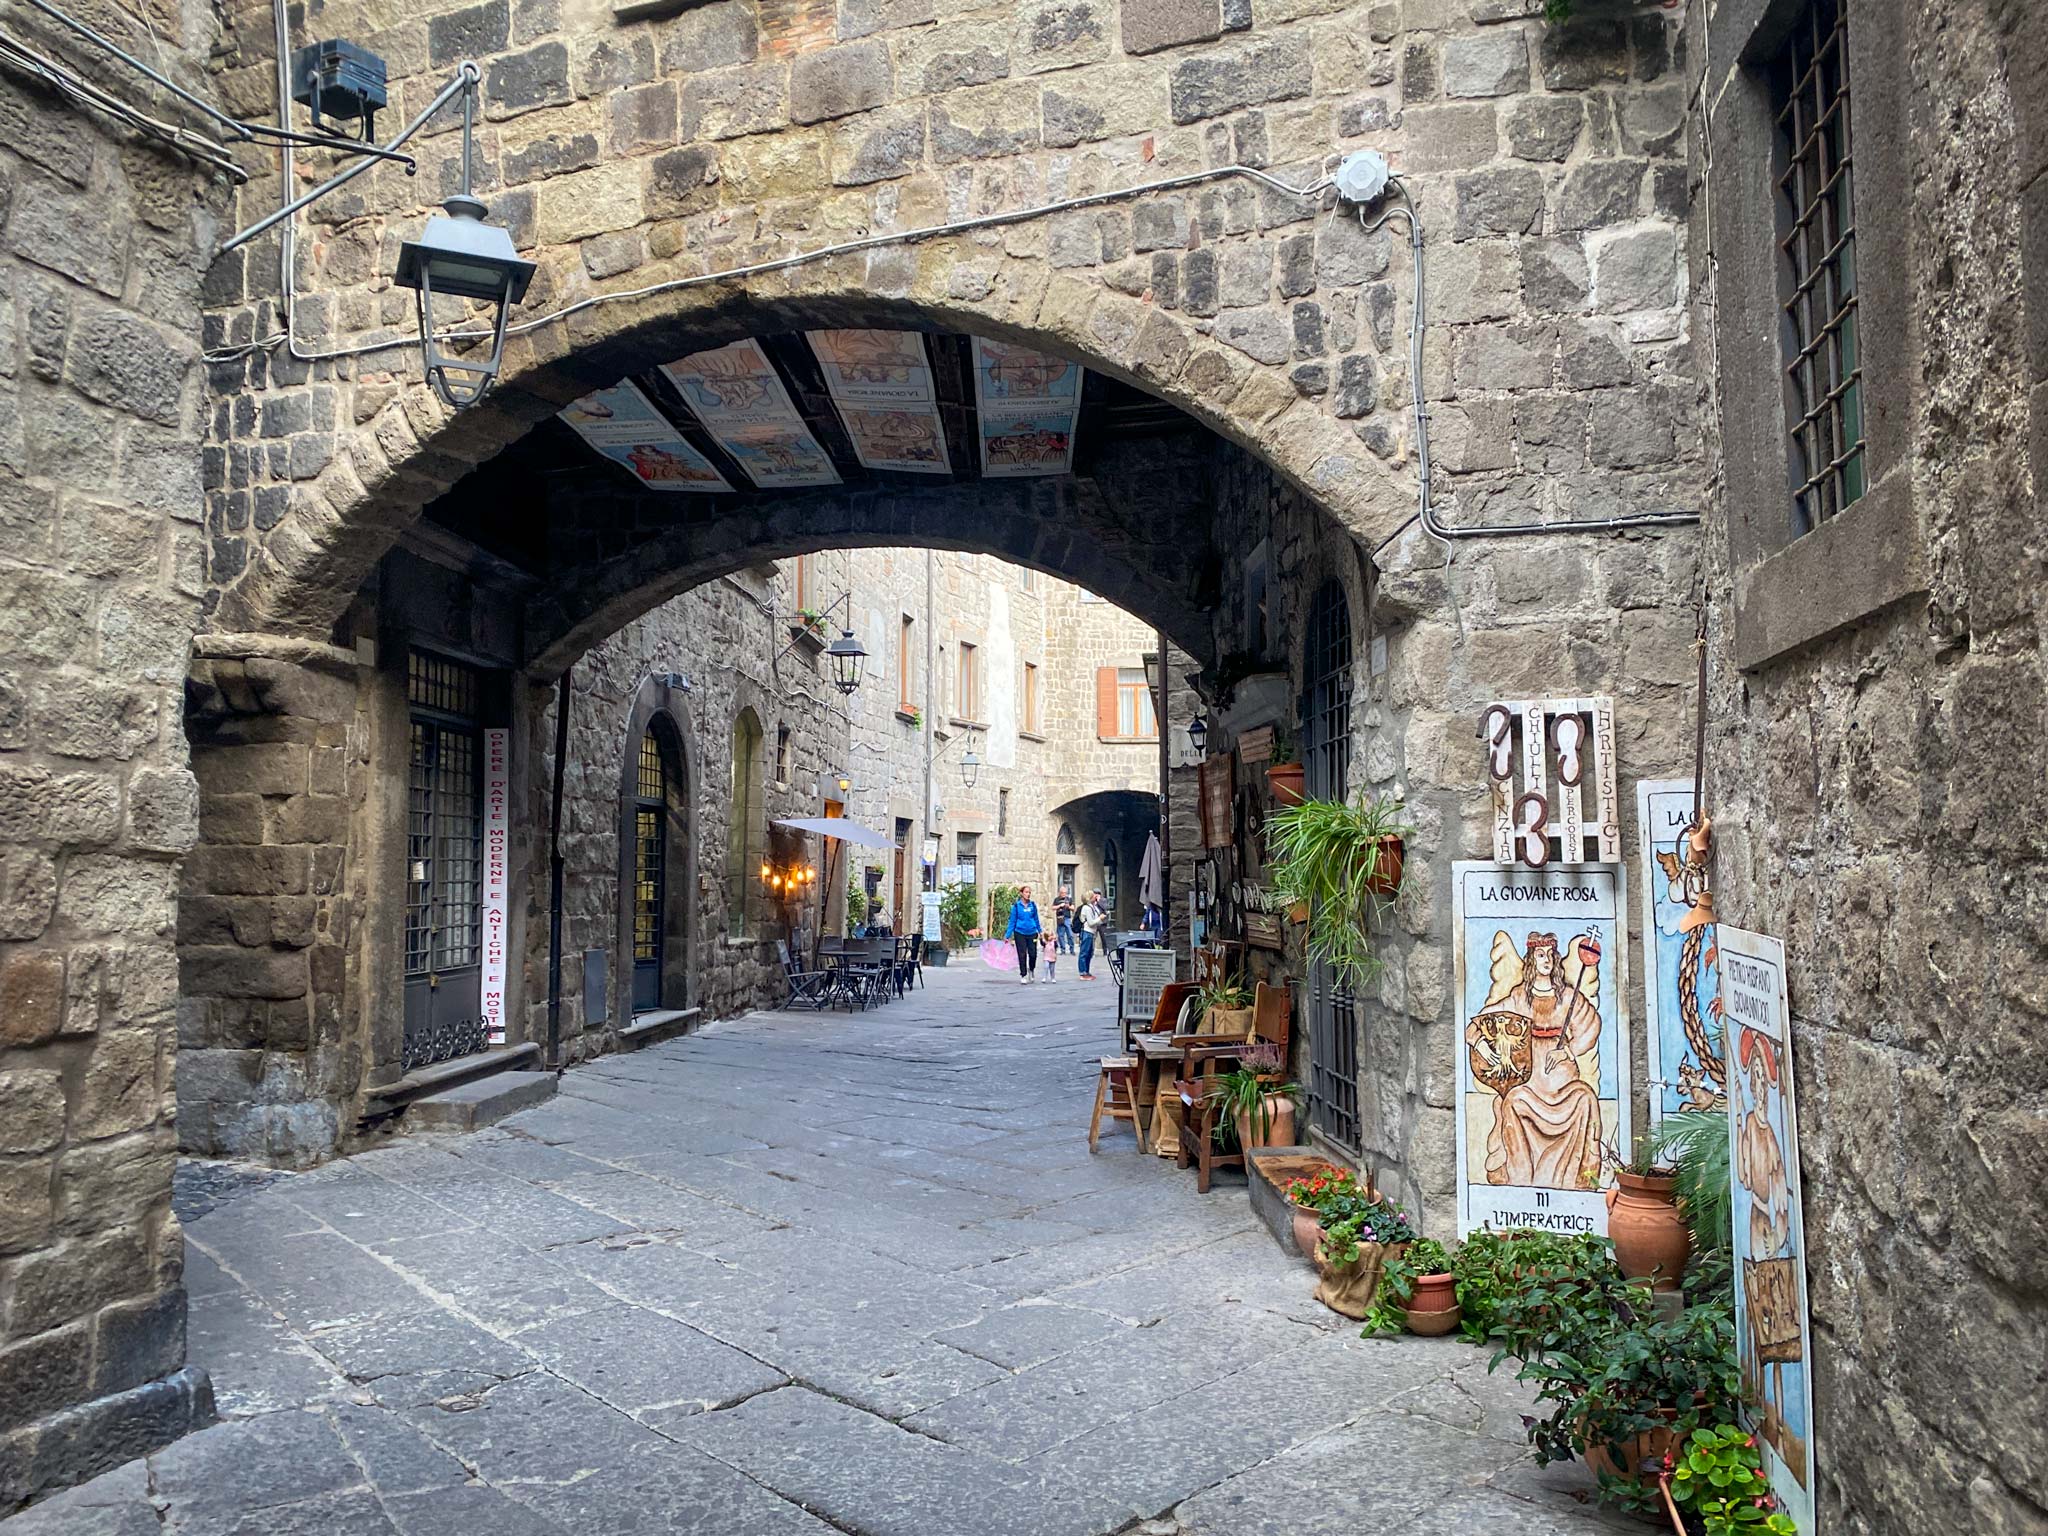 The old streets of Viterbo, a town near Rome